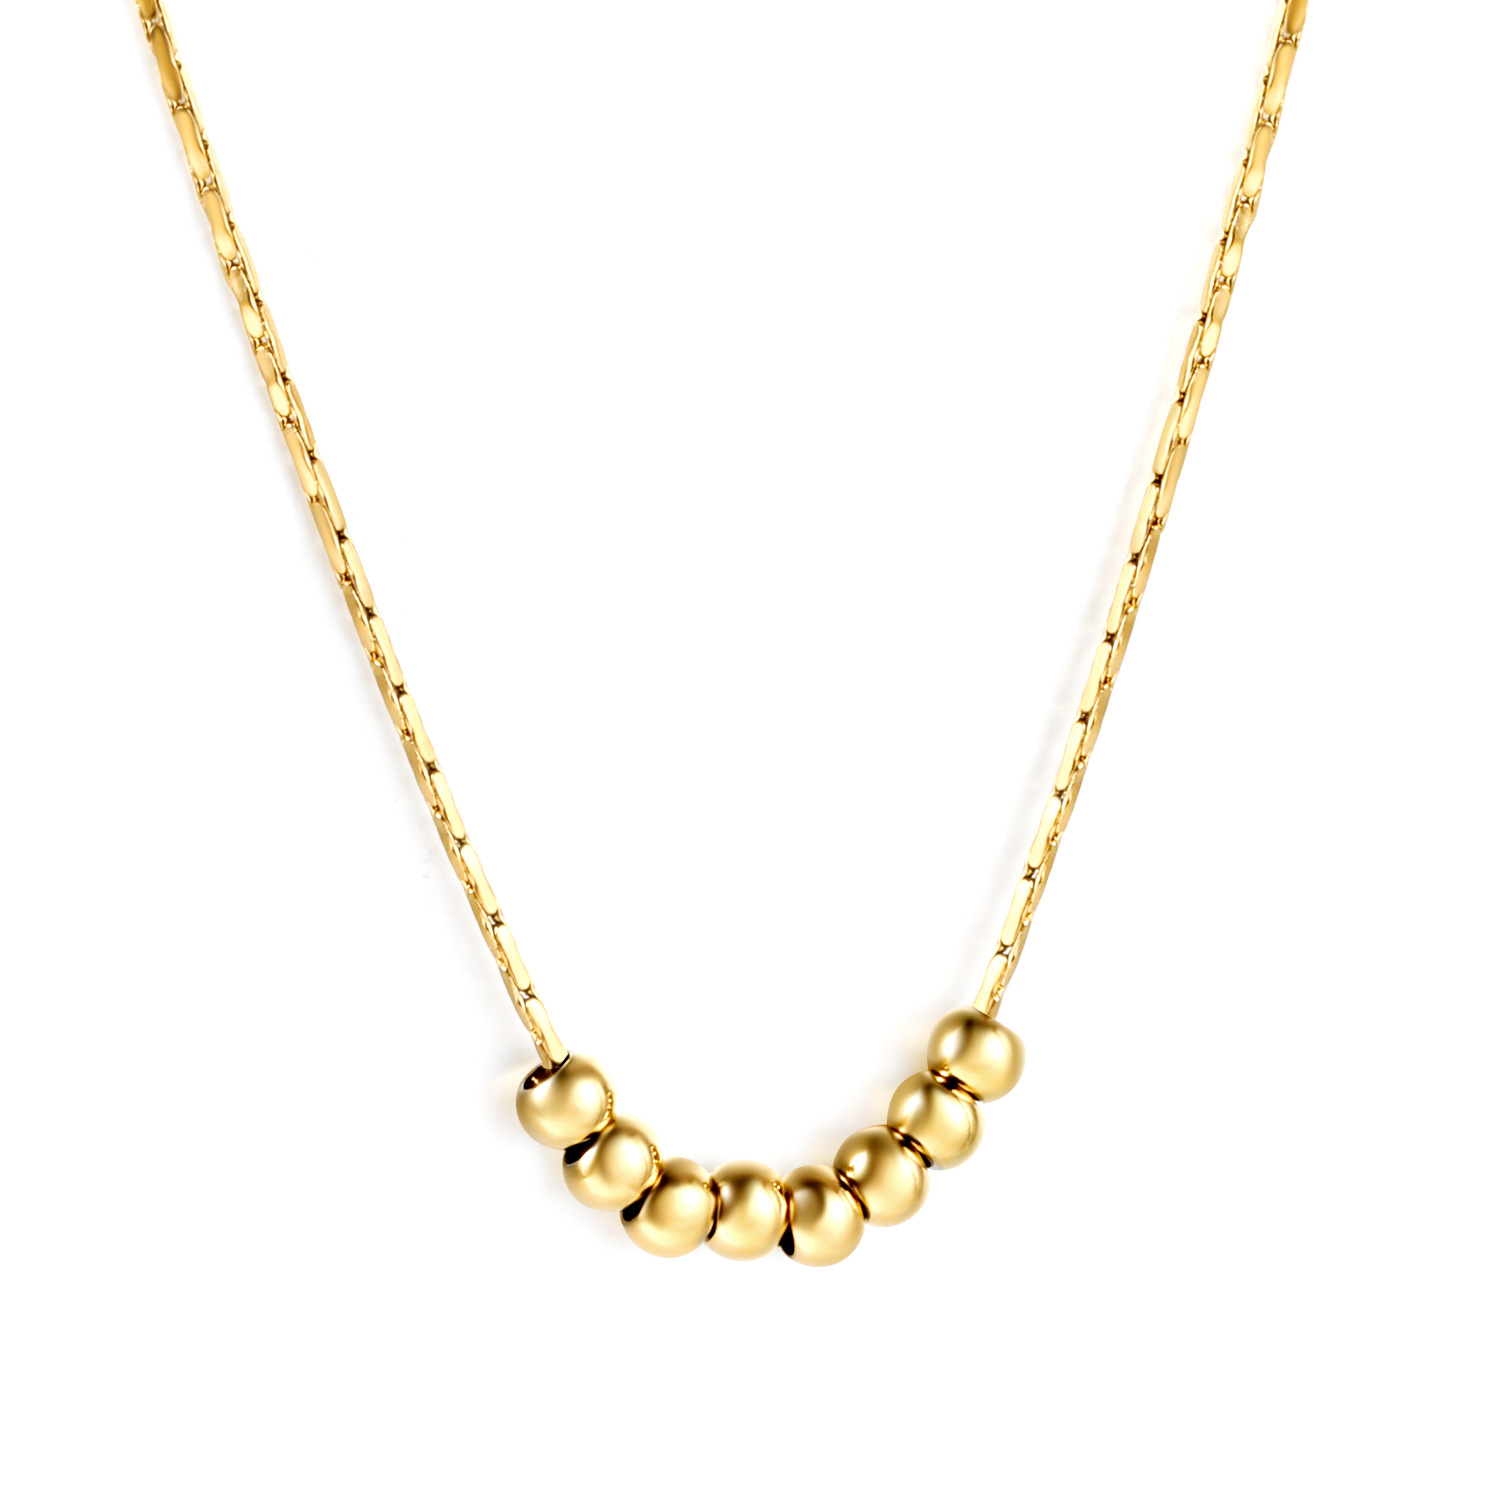 4:Steel ball pendant necklace gold